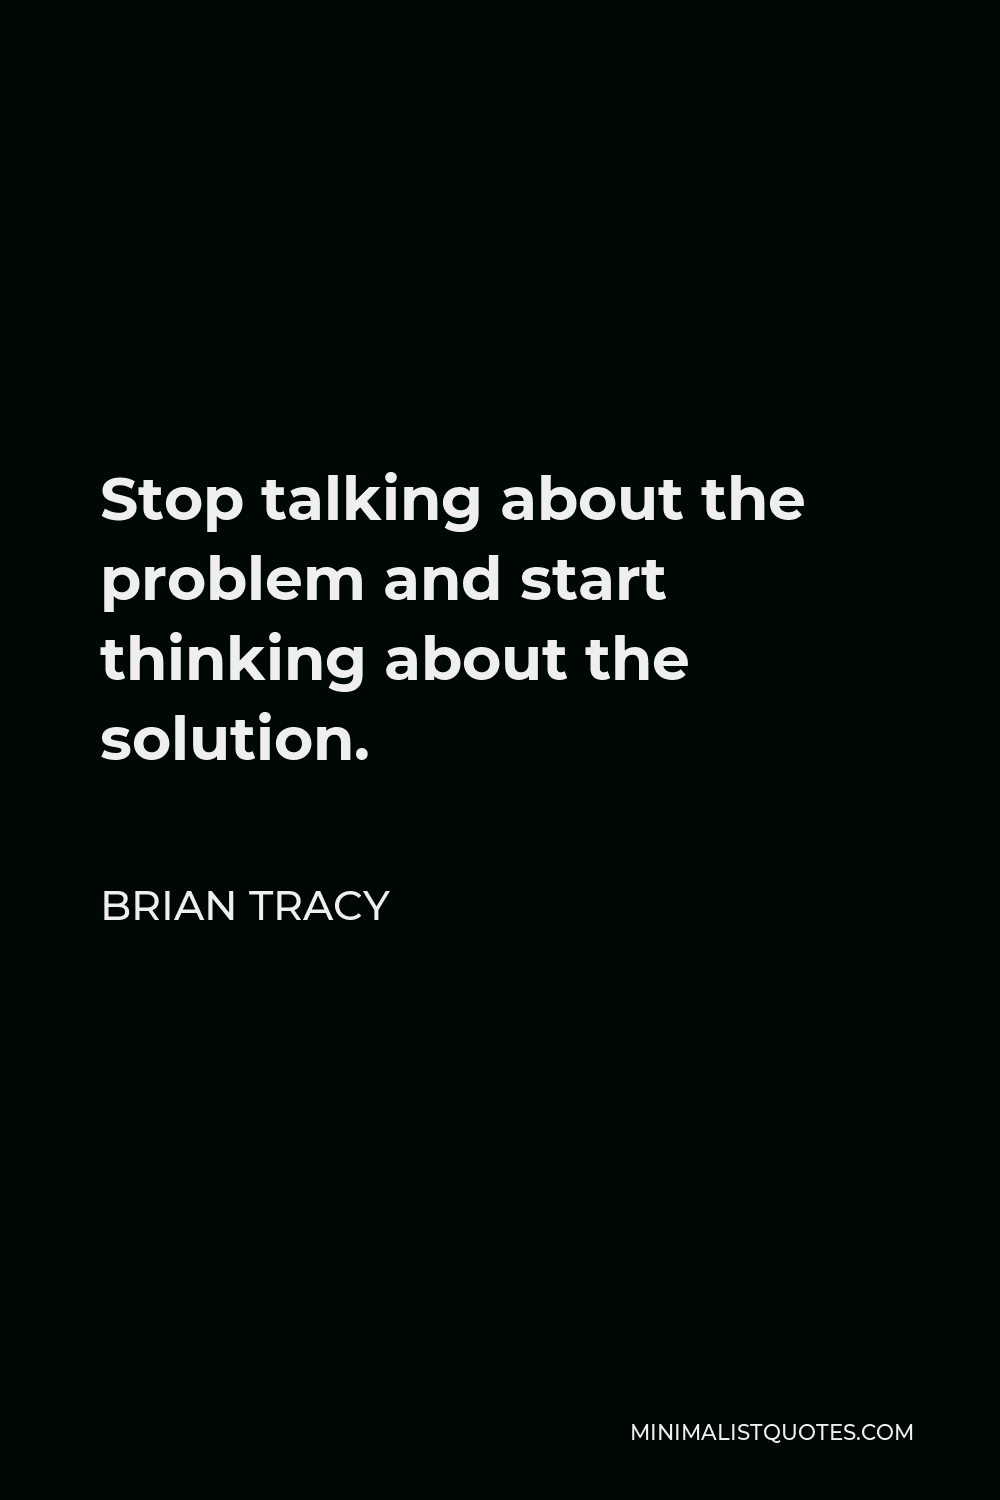 Brian Tracy Quote - Stop talking about the problem and start thinking about the solution.